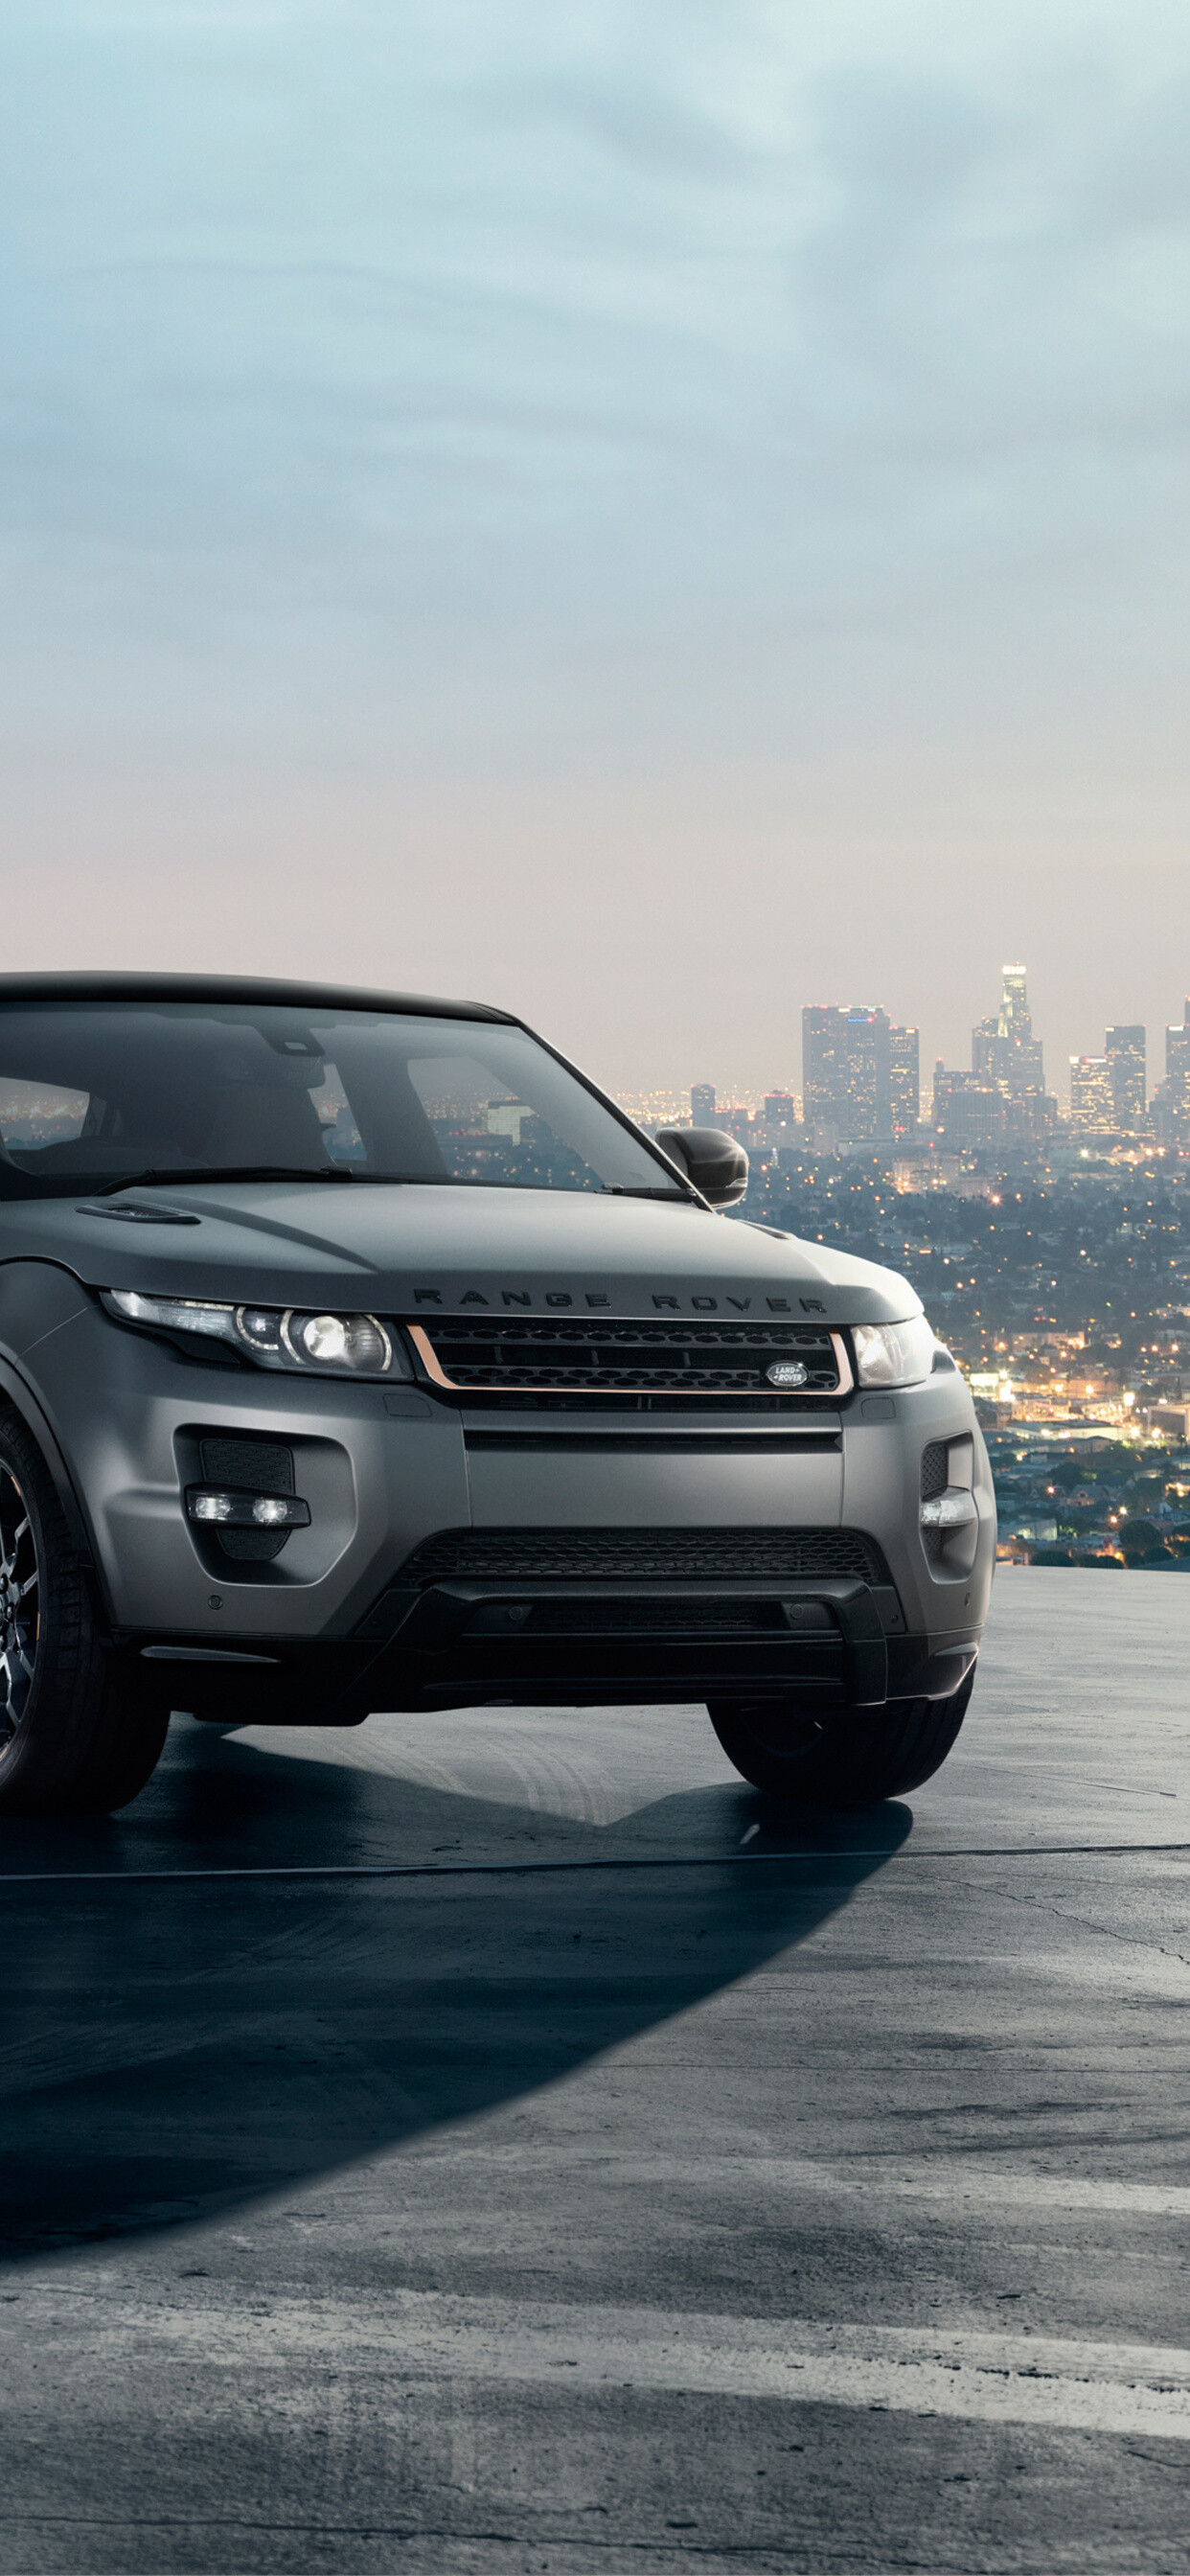 Range Rover: Model Evoque Coupe, Build on base of the Land Rover LRX concept vehicle. 1250x2690 HD Wallpaper.